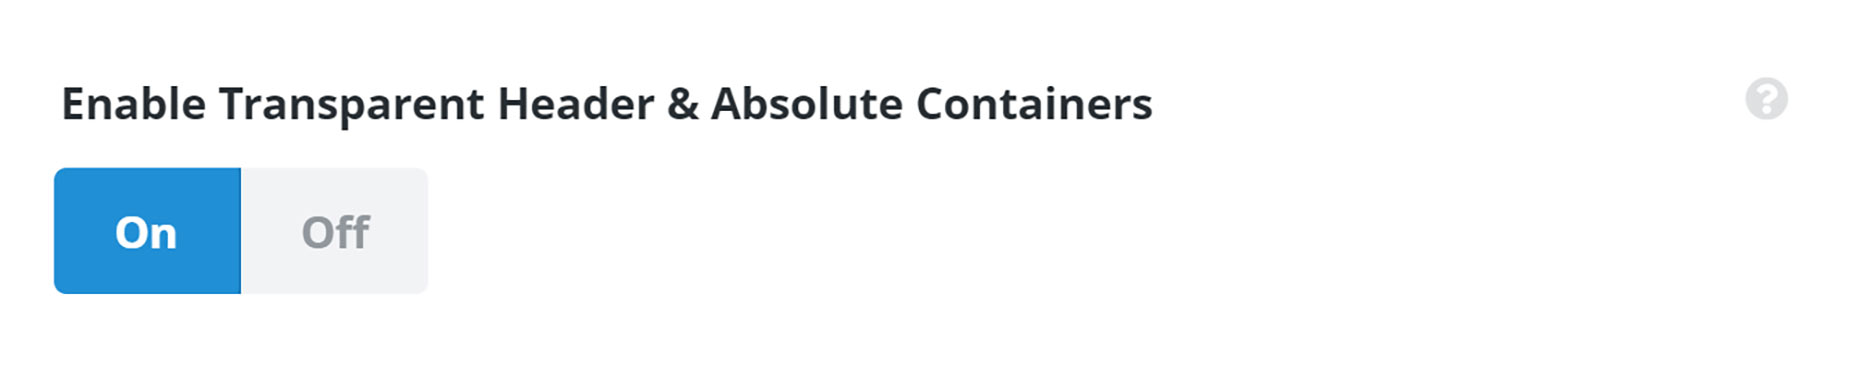 Enable Transparent Header & Absolute Containers